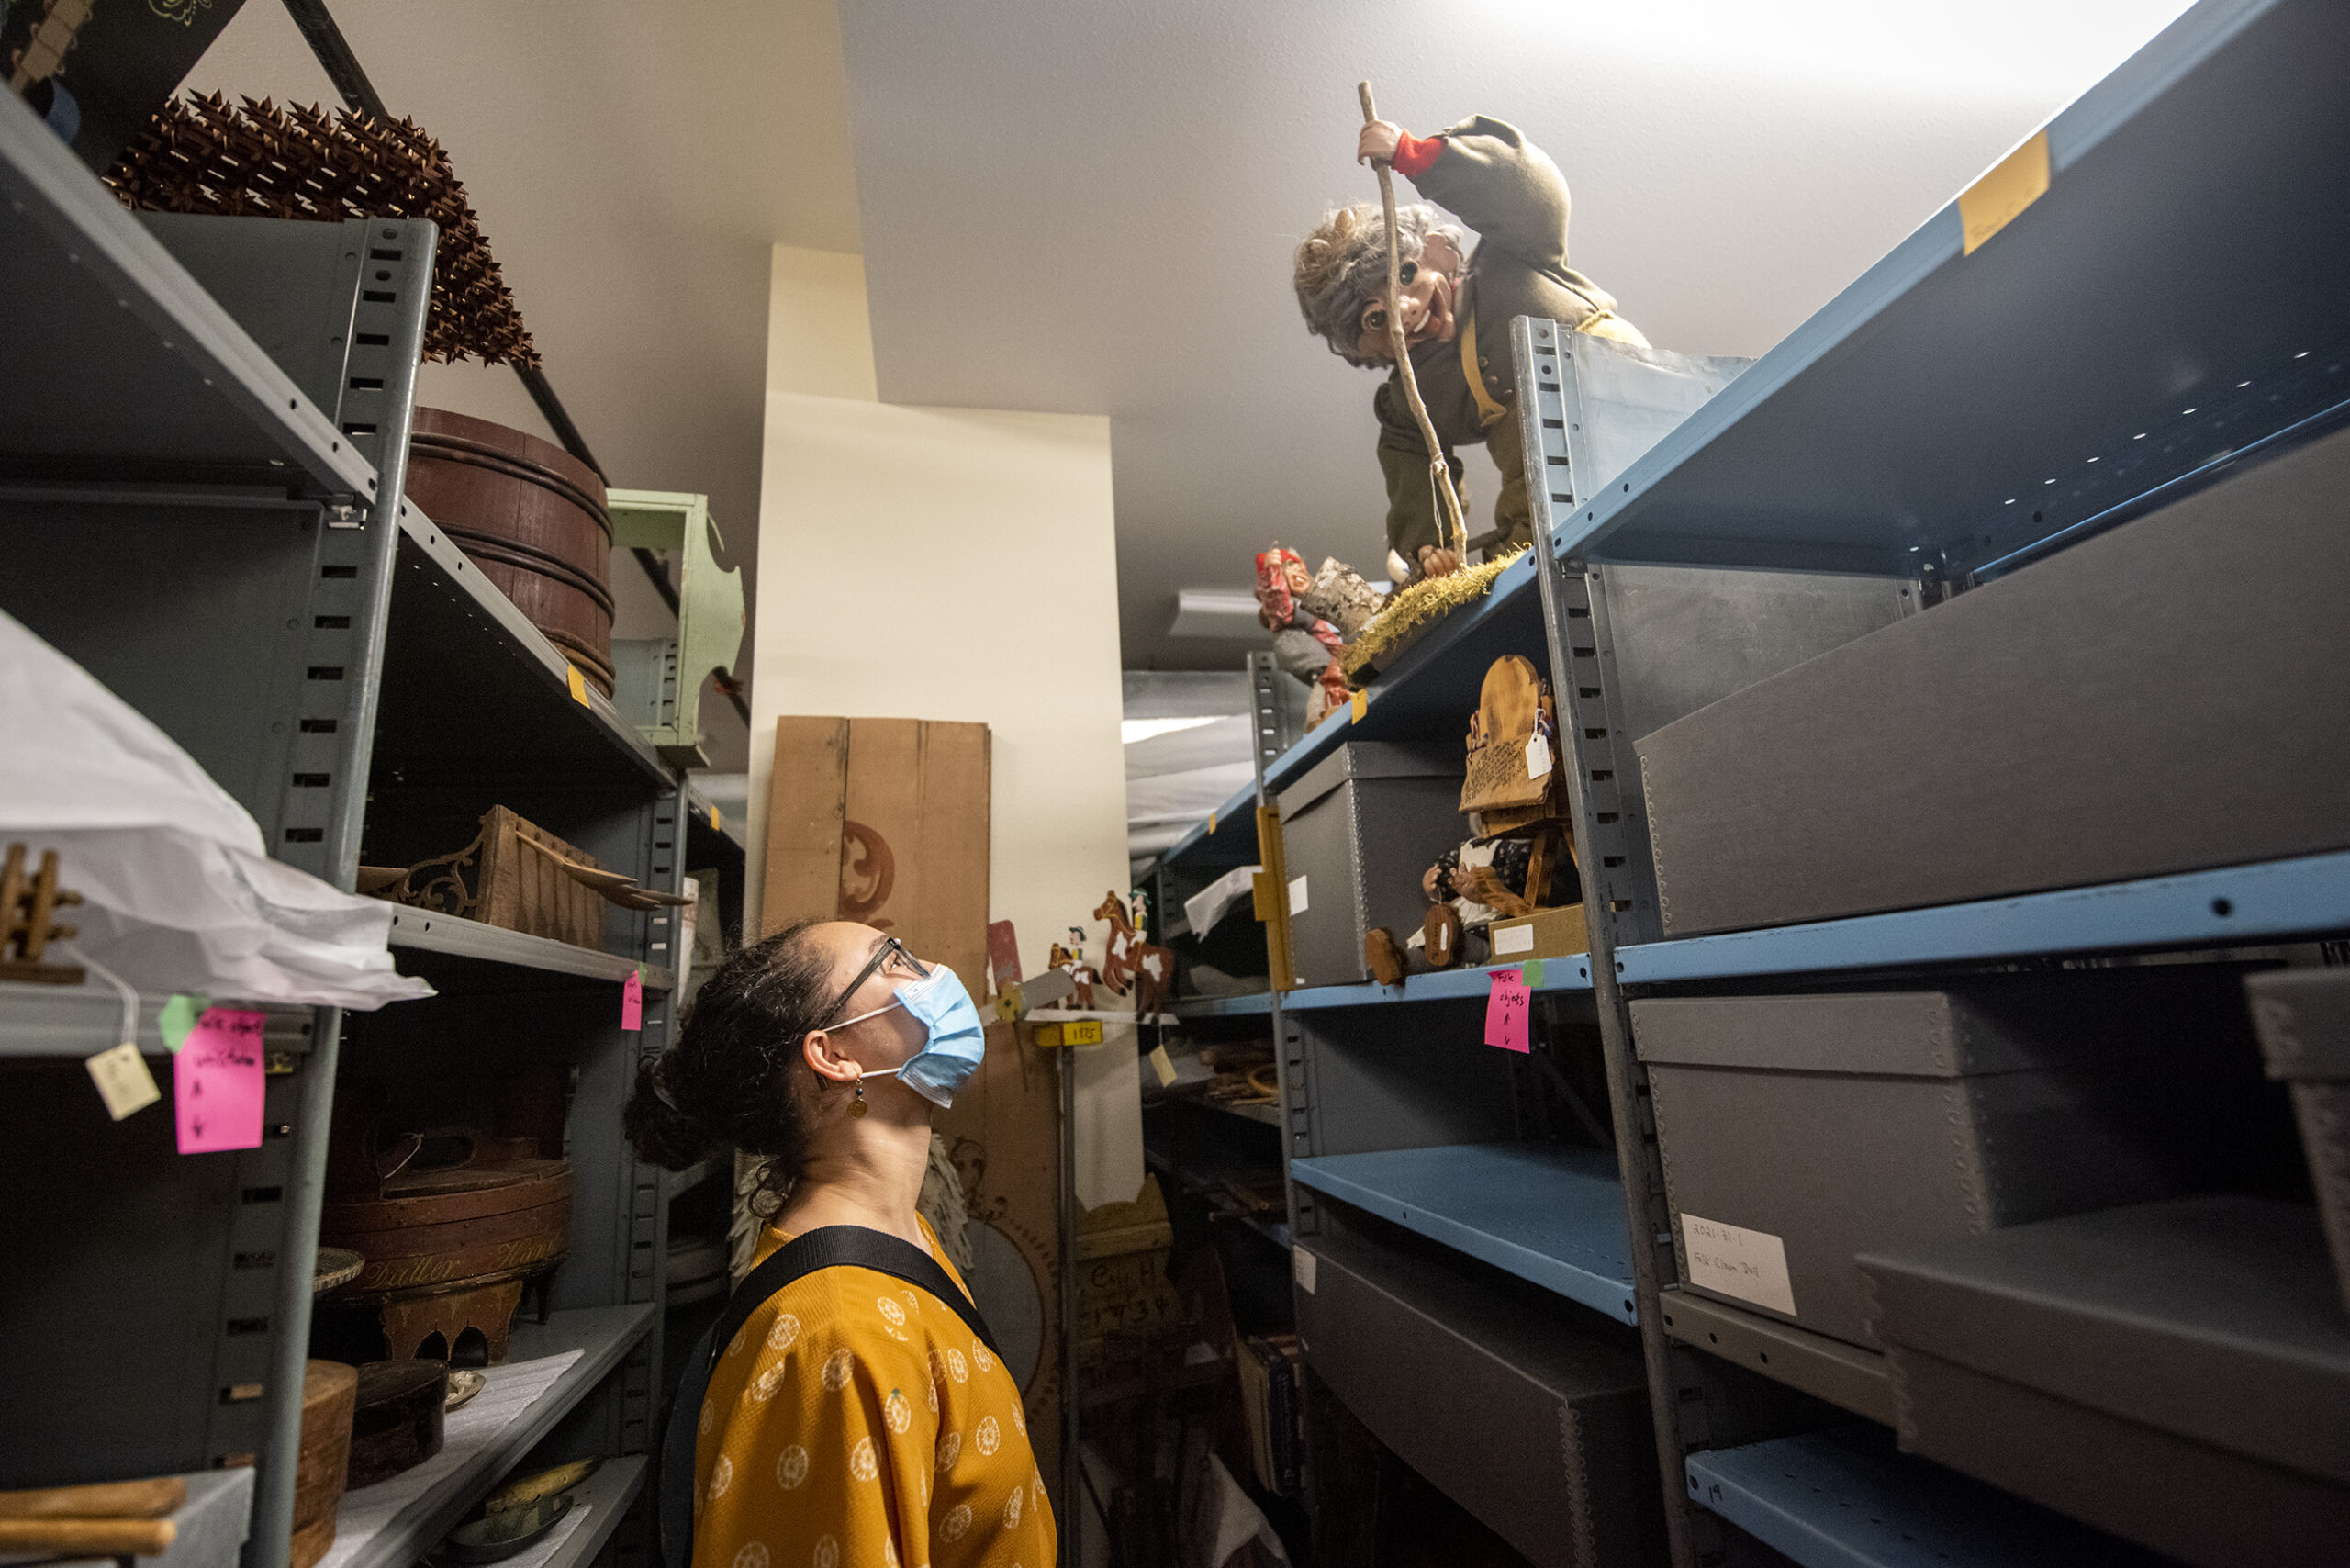 A girl looks up at a tall shelf full of museum items.